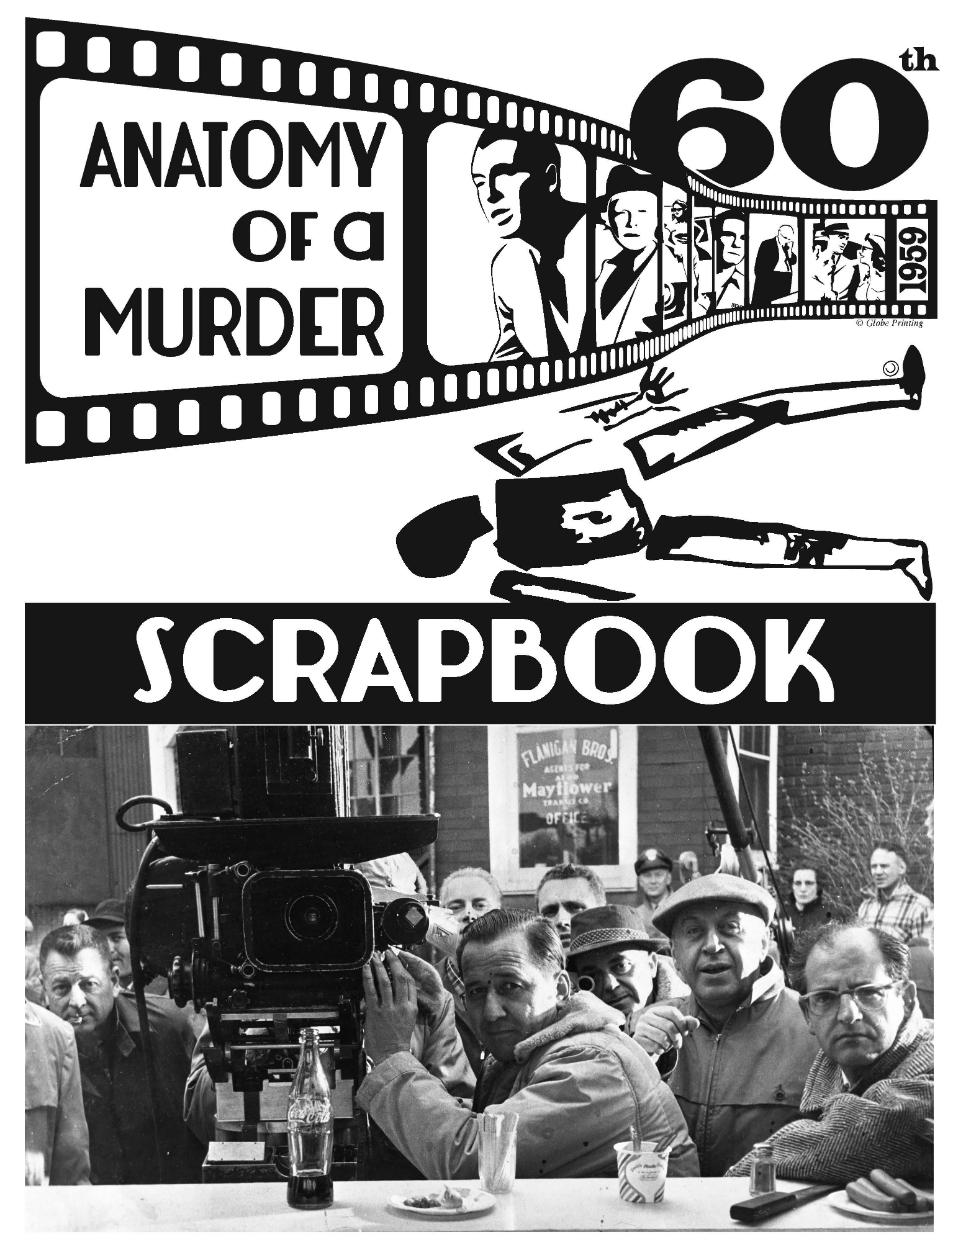 Anatomy of a Murder Scrapbook 60th Anniversary - Be Inspired UP